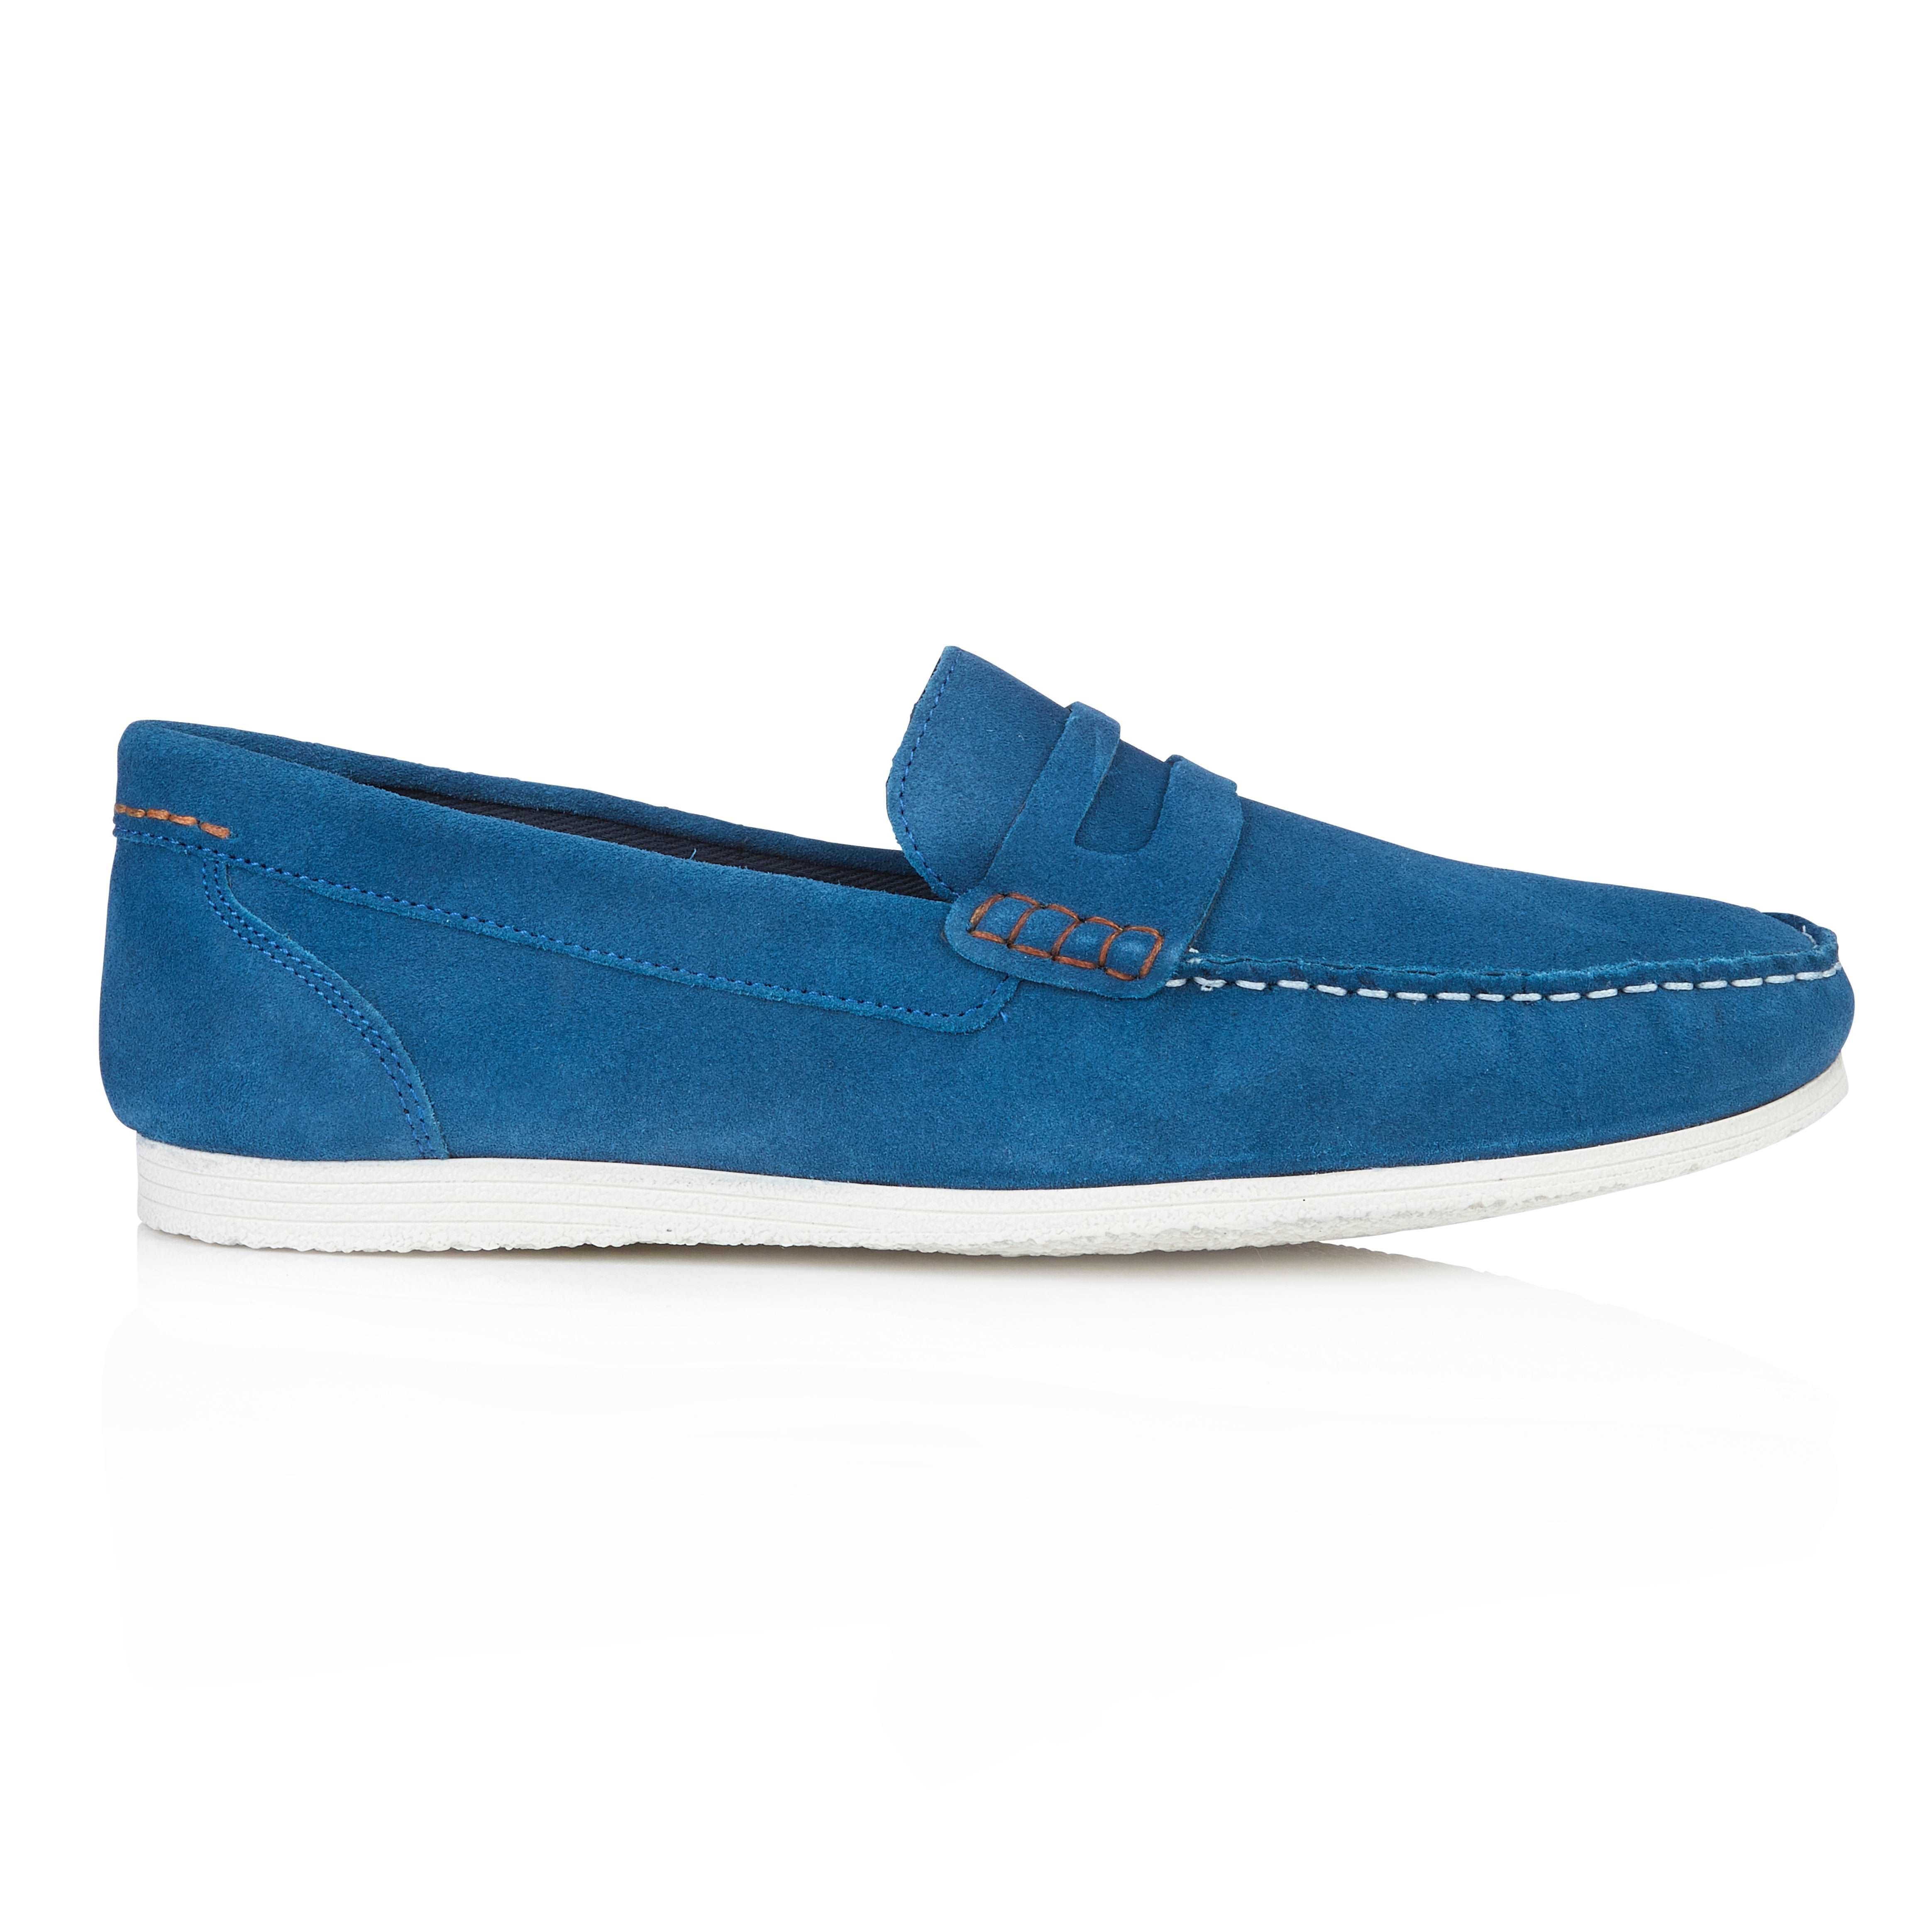 Stanhope Suede Penny Loafer